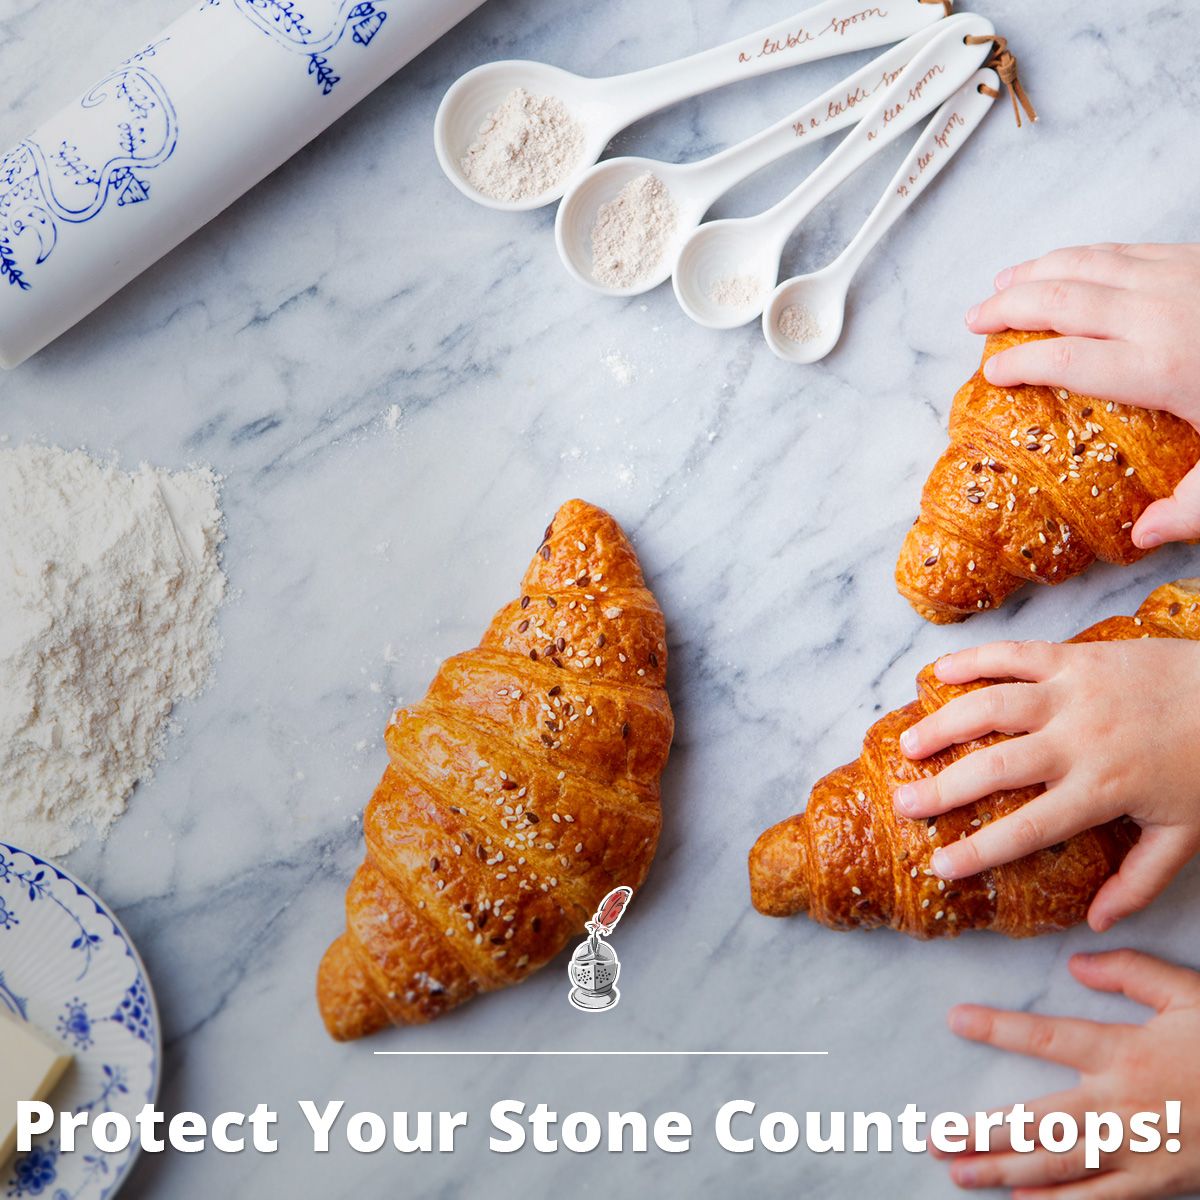 Protect Your Stone Countertops